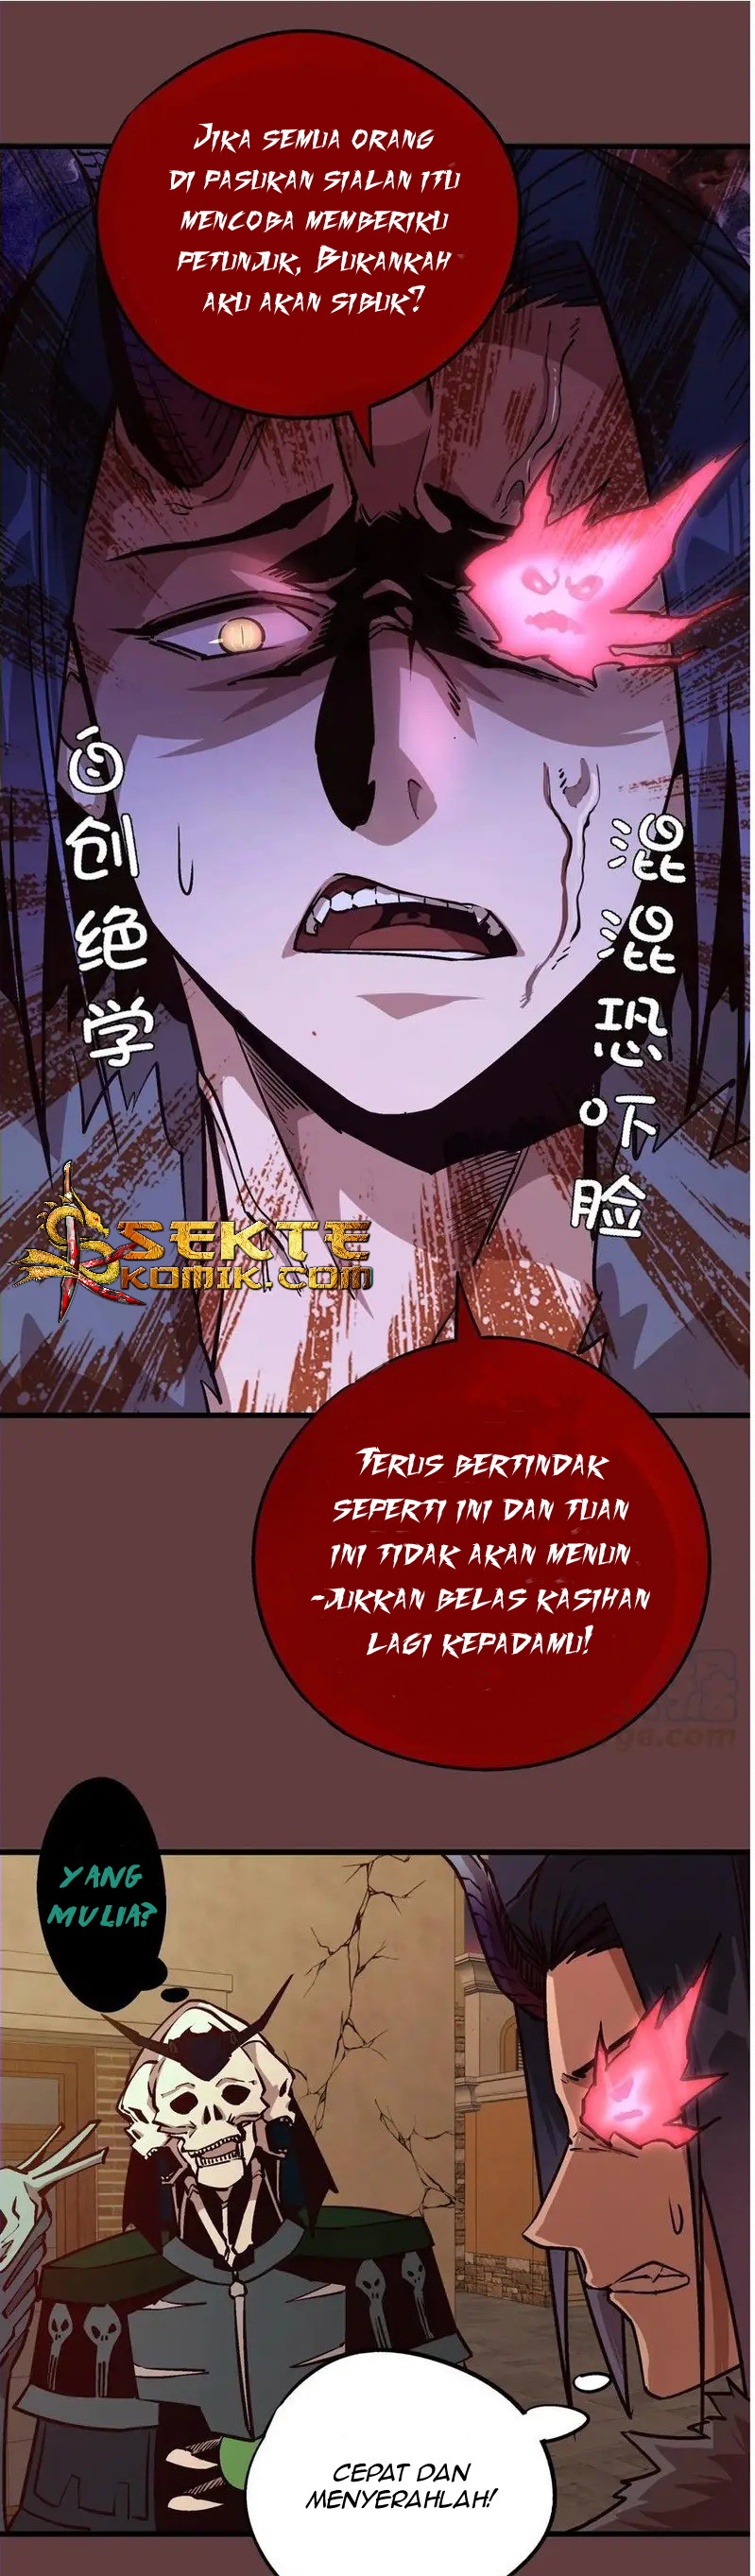 I’m Not The Overlord Chapter 2 62